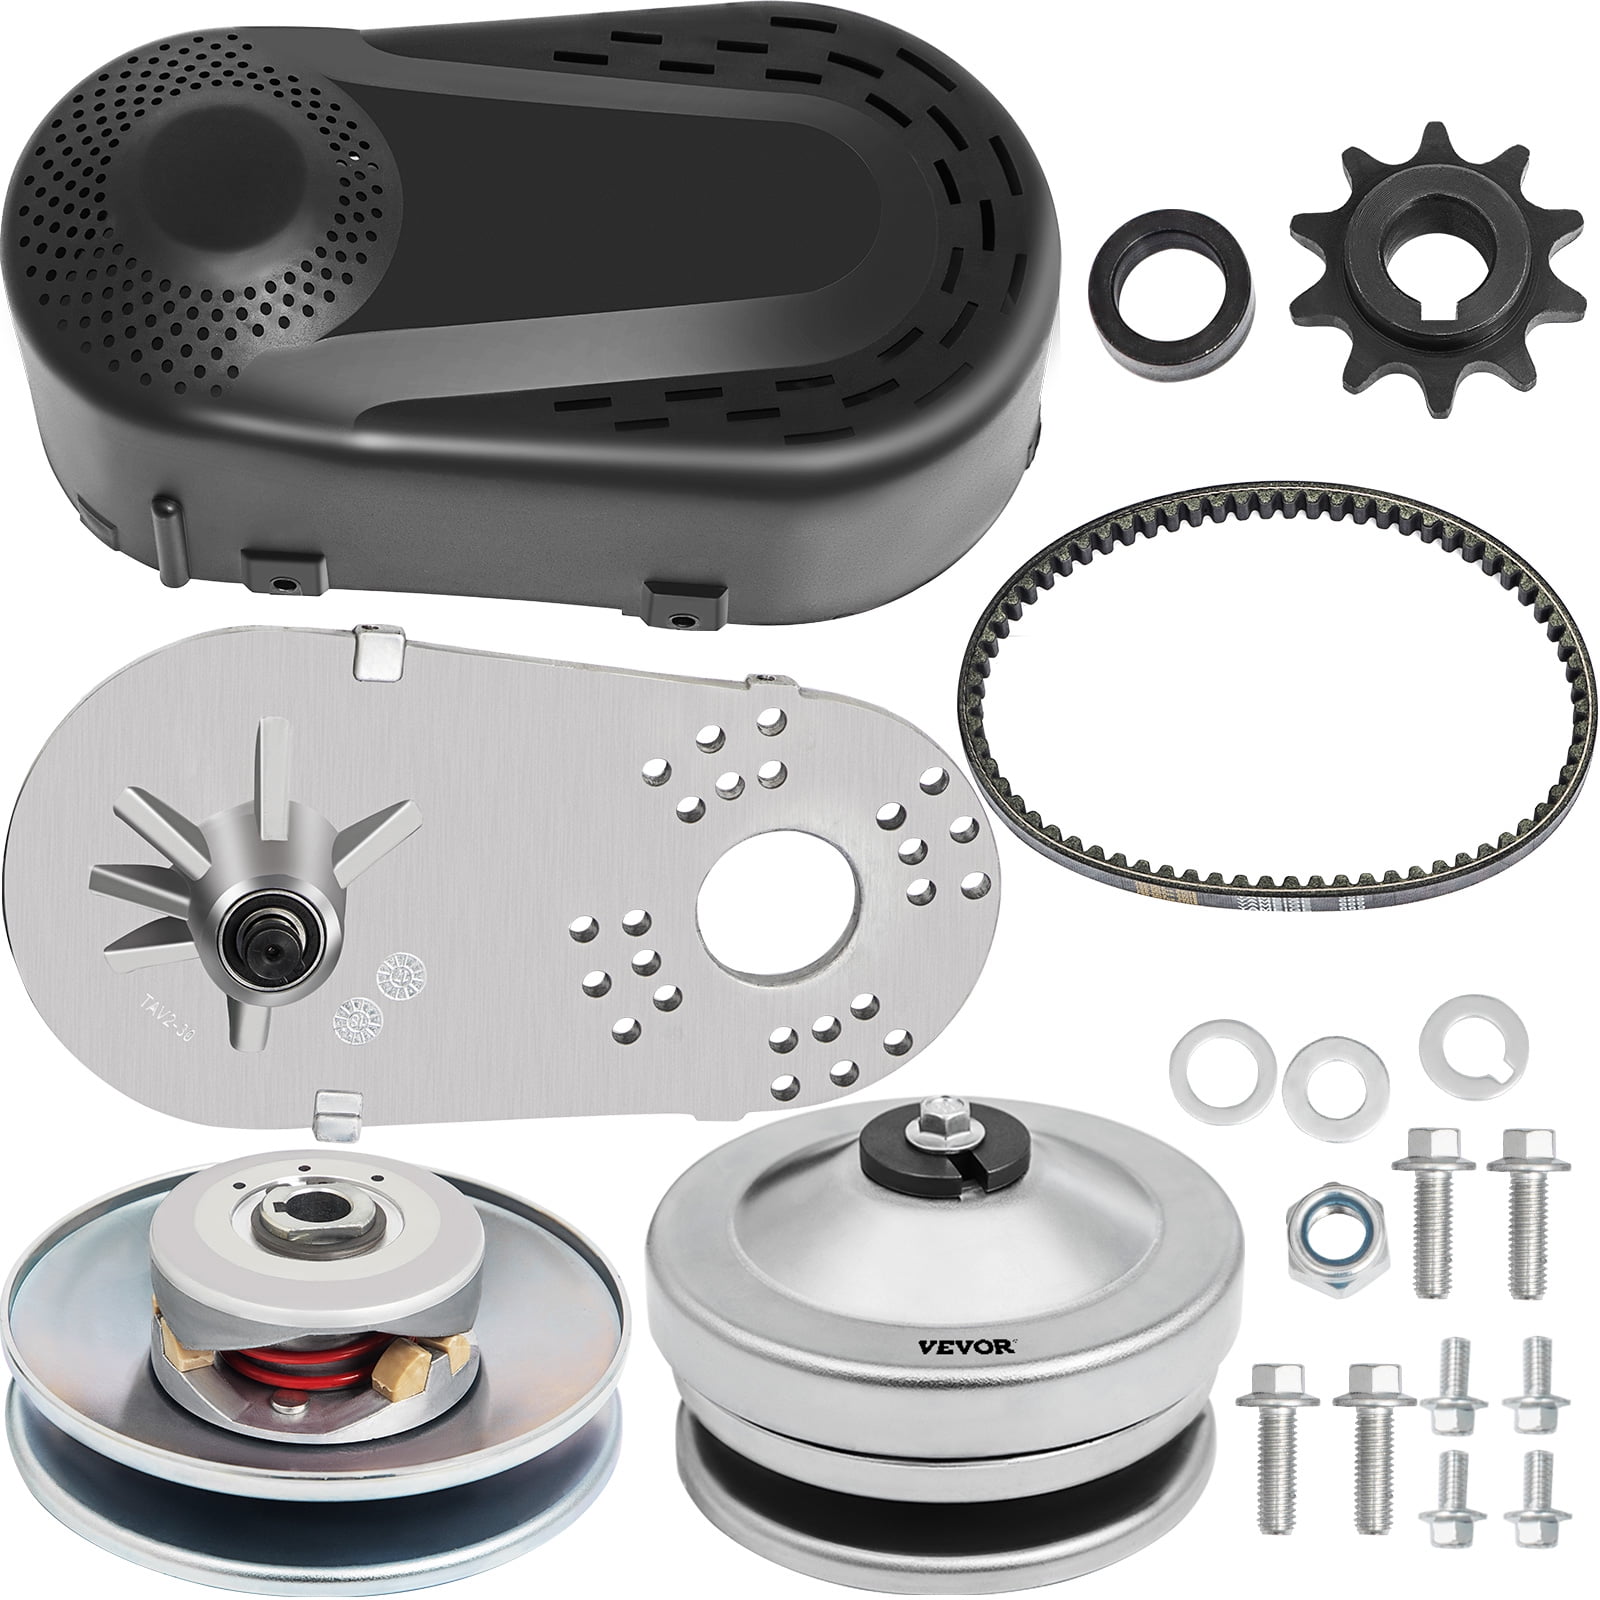 For Predator 212cc 6.5HP Centrifugal Clutch 20mm Bore 10Tooth with 420 Chain Kit 